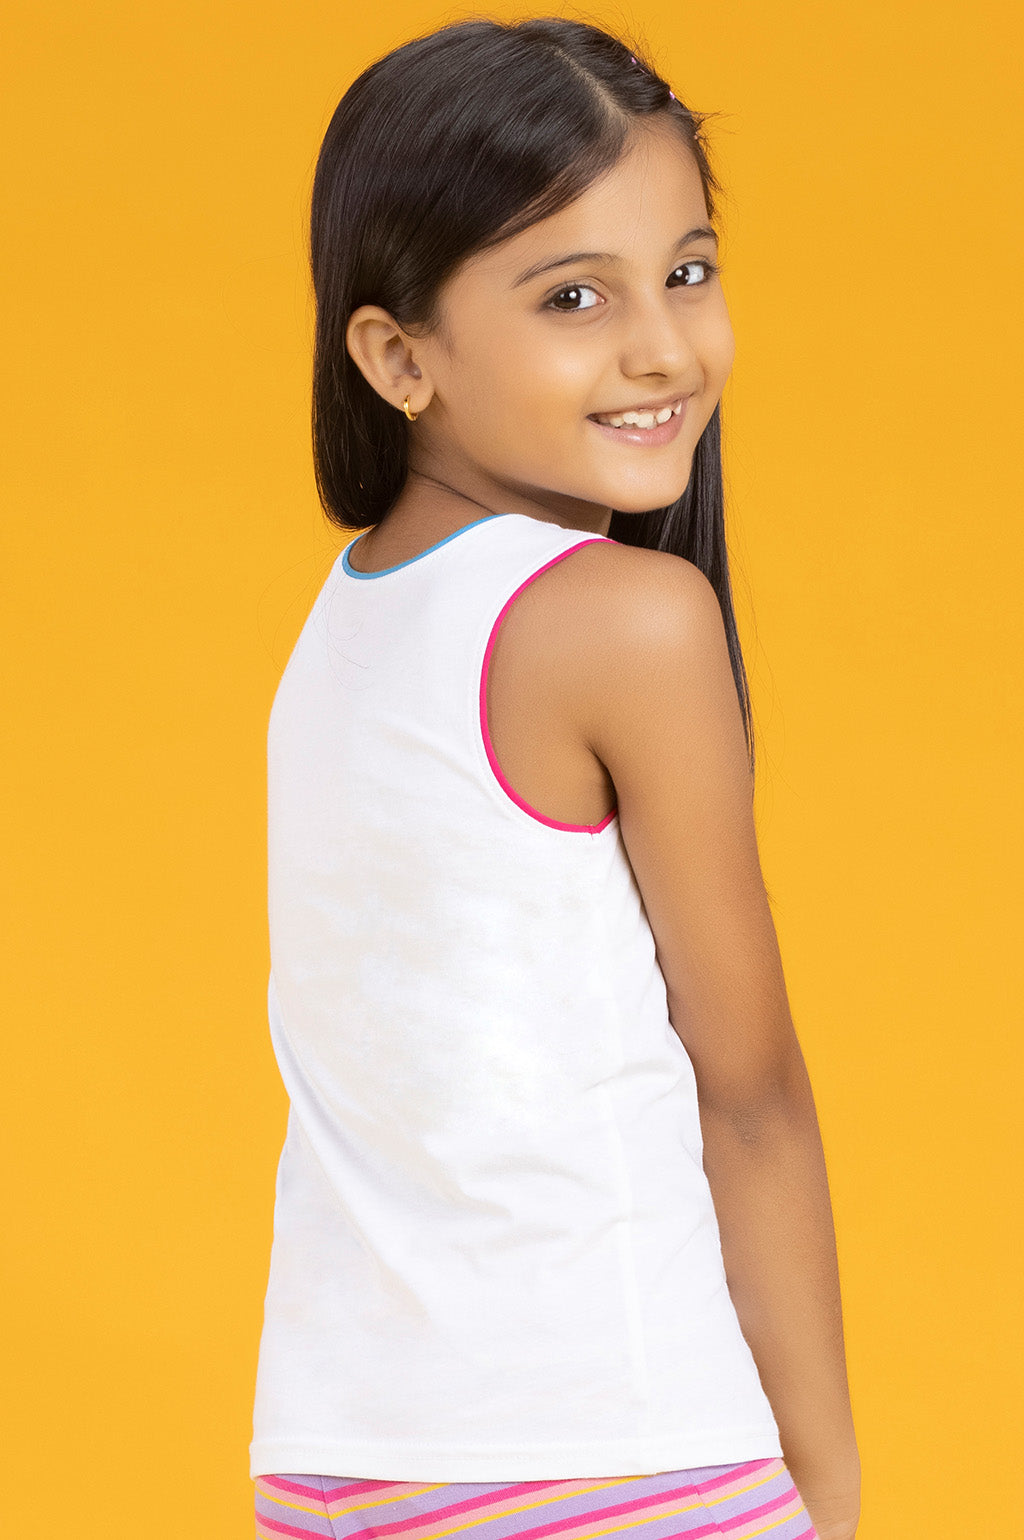 Girls tank top primary combed cotton white - XYLife Kids Wear